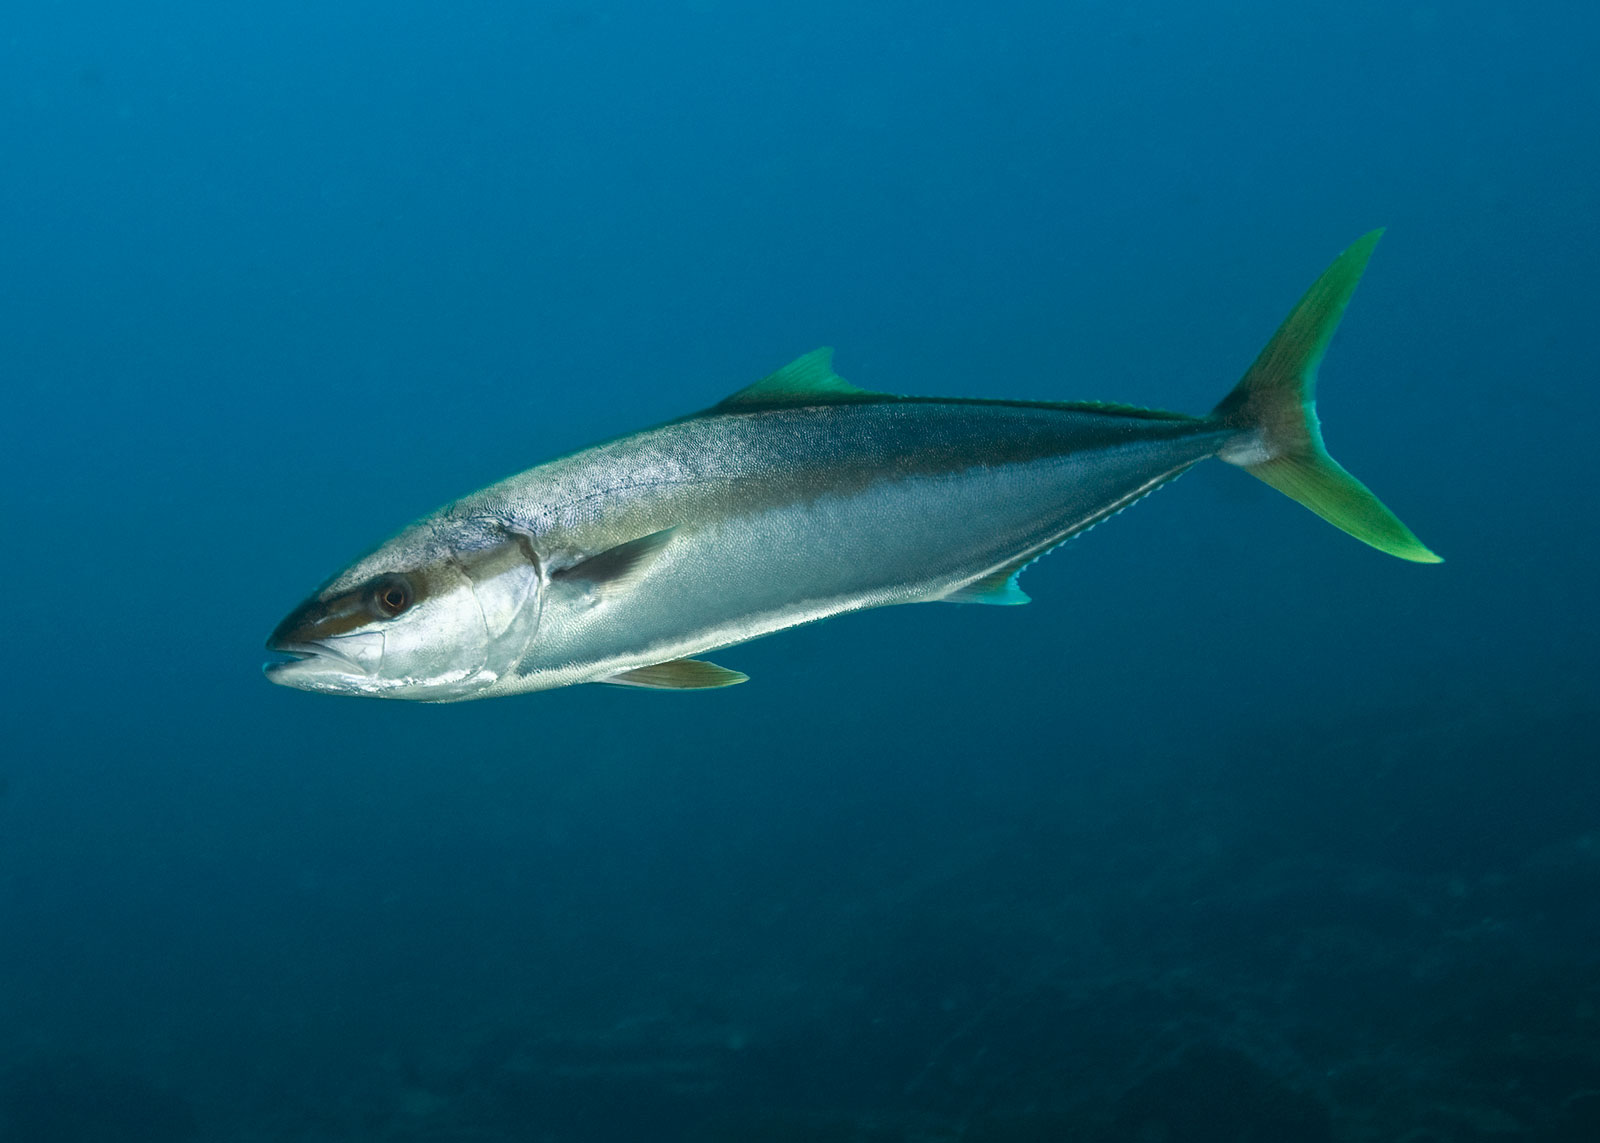 https://www.uw360.asia/2020/wp-content/uploads/2017/11/7-Facts-about-the-Yellowtail-King-Fish.jpg